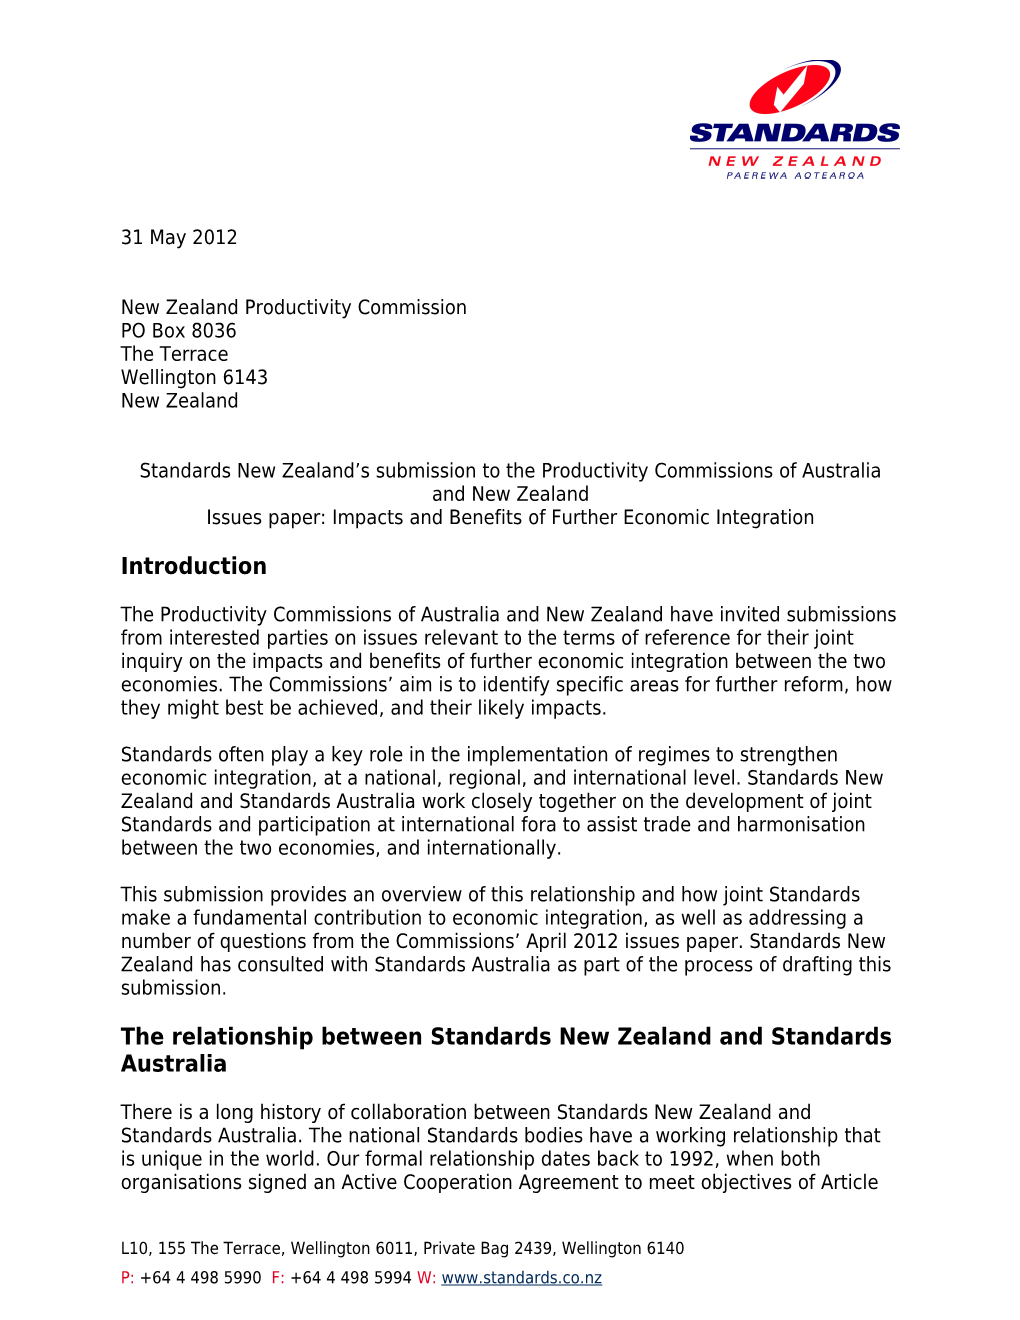 Submission DR52 - Standards New Zealand - Strengthening Economic Relations Between Australia